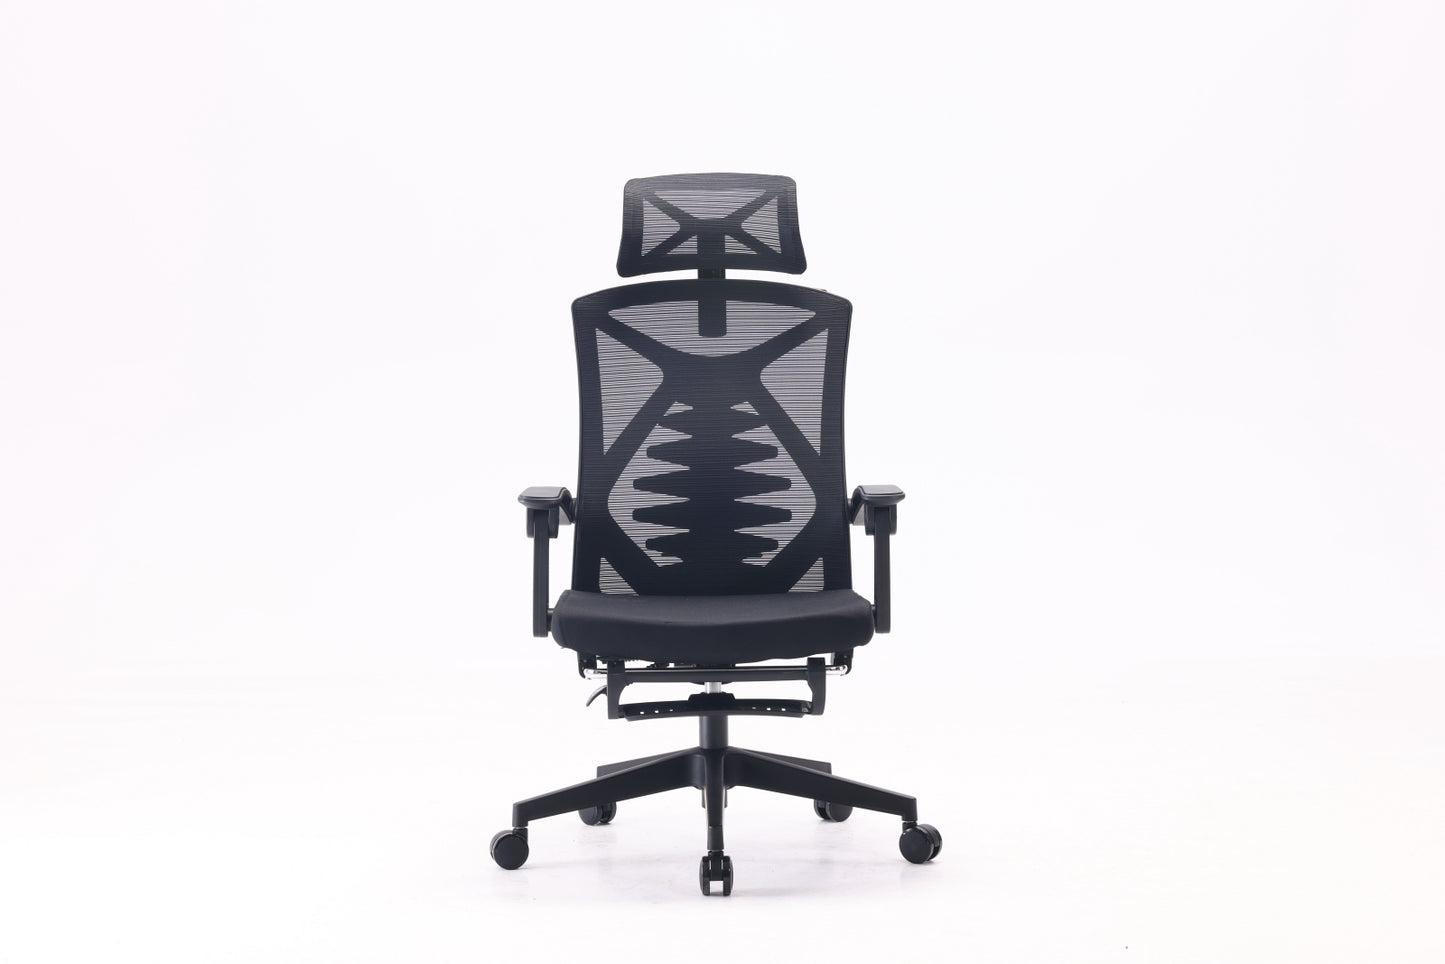 Sihoo M92B Ergonomic Chair (with built-in footrest)